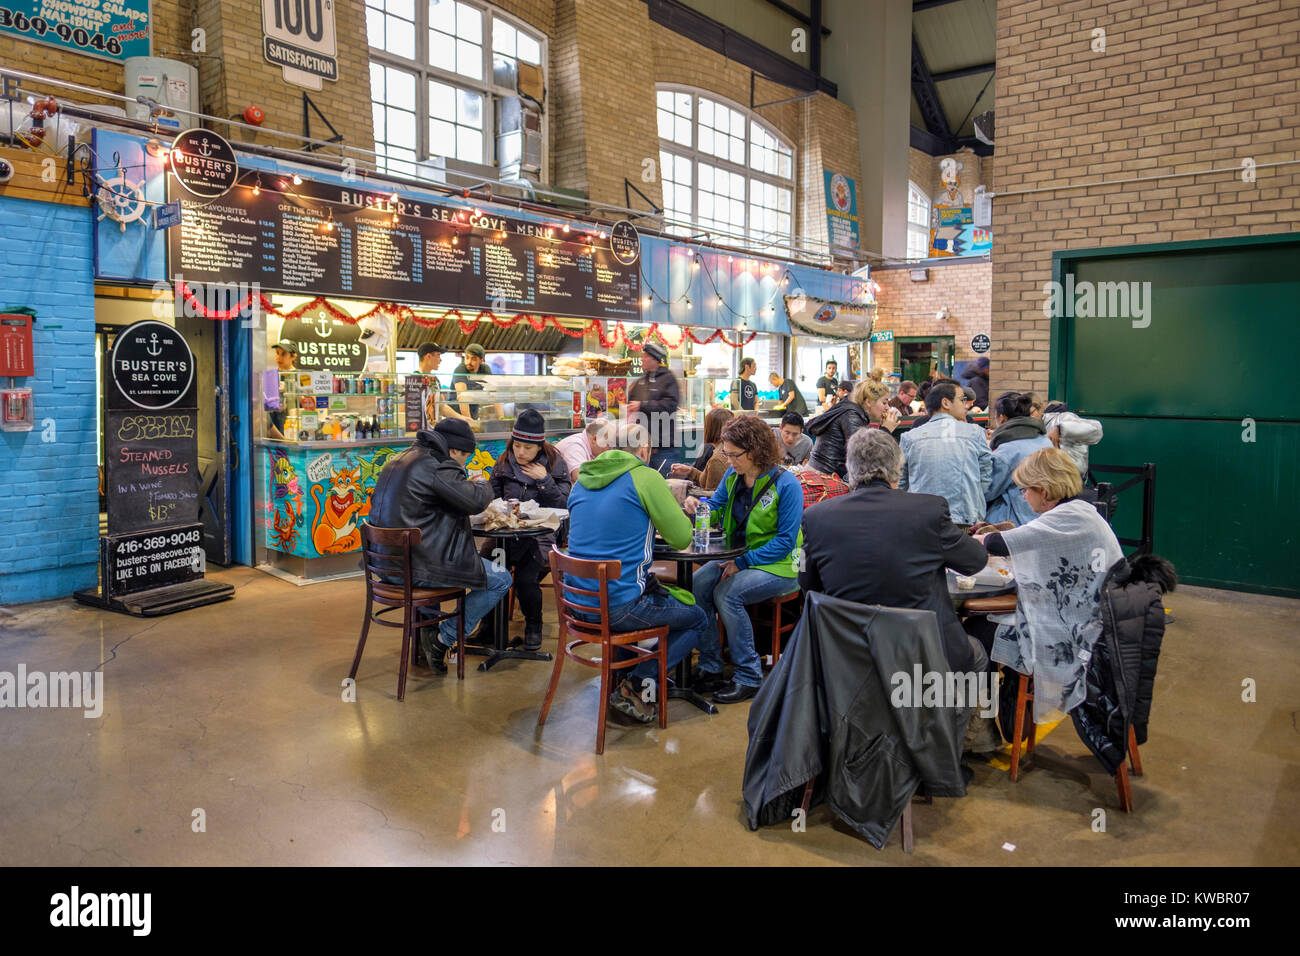 Customers having lunch at Buster's Sea Cove Restaurant, specialized in seafood, St Lawrence Market, downtown Toronto, Ontario, Canada. Stock Photo